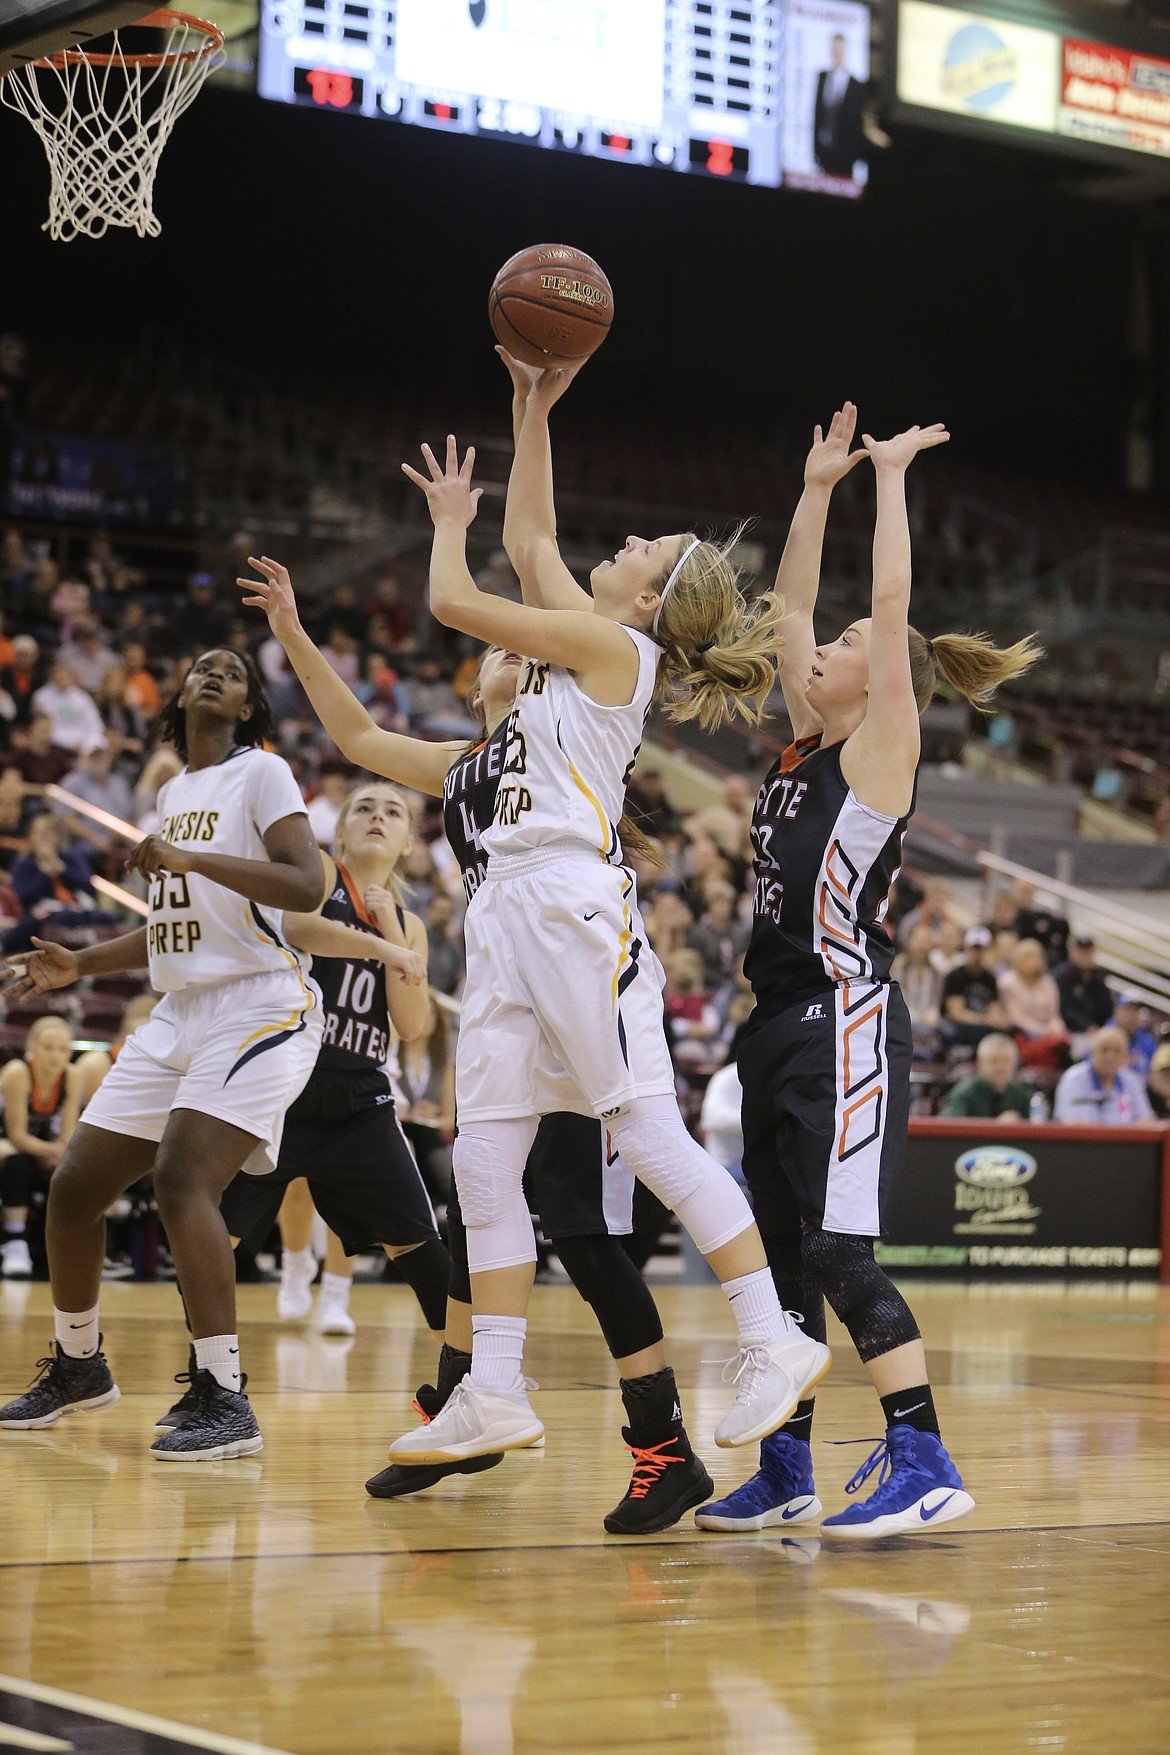 JASON DUCHOW PHOTOGRAPHY
Rachel Schroeder of Genesis Prep goes up for a shot against Butte County in the title game of the state 1A Division II girls basketball tournament Saturday at the Ford Idaho Center in Nampa.